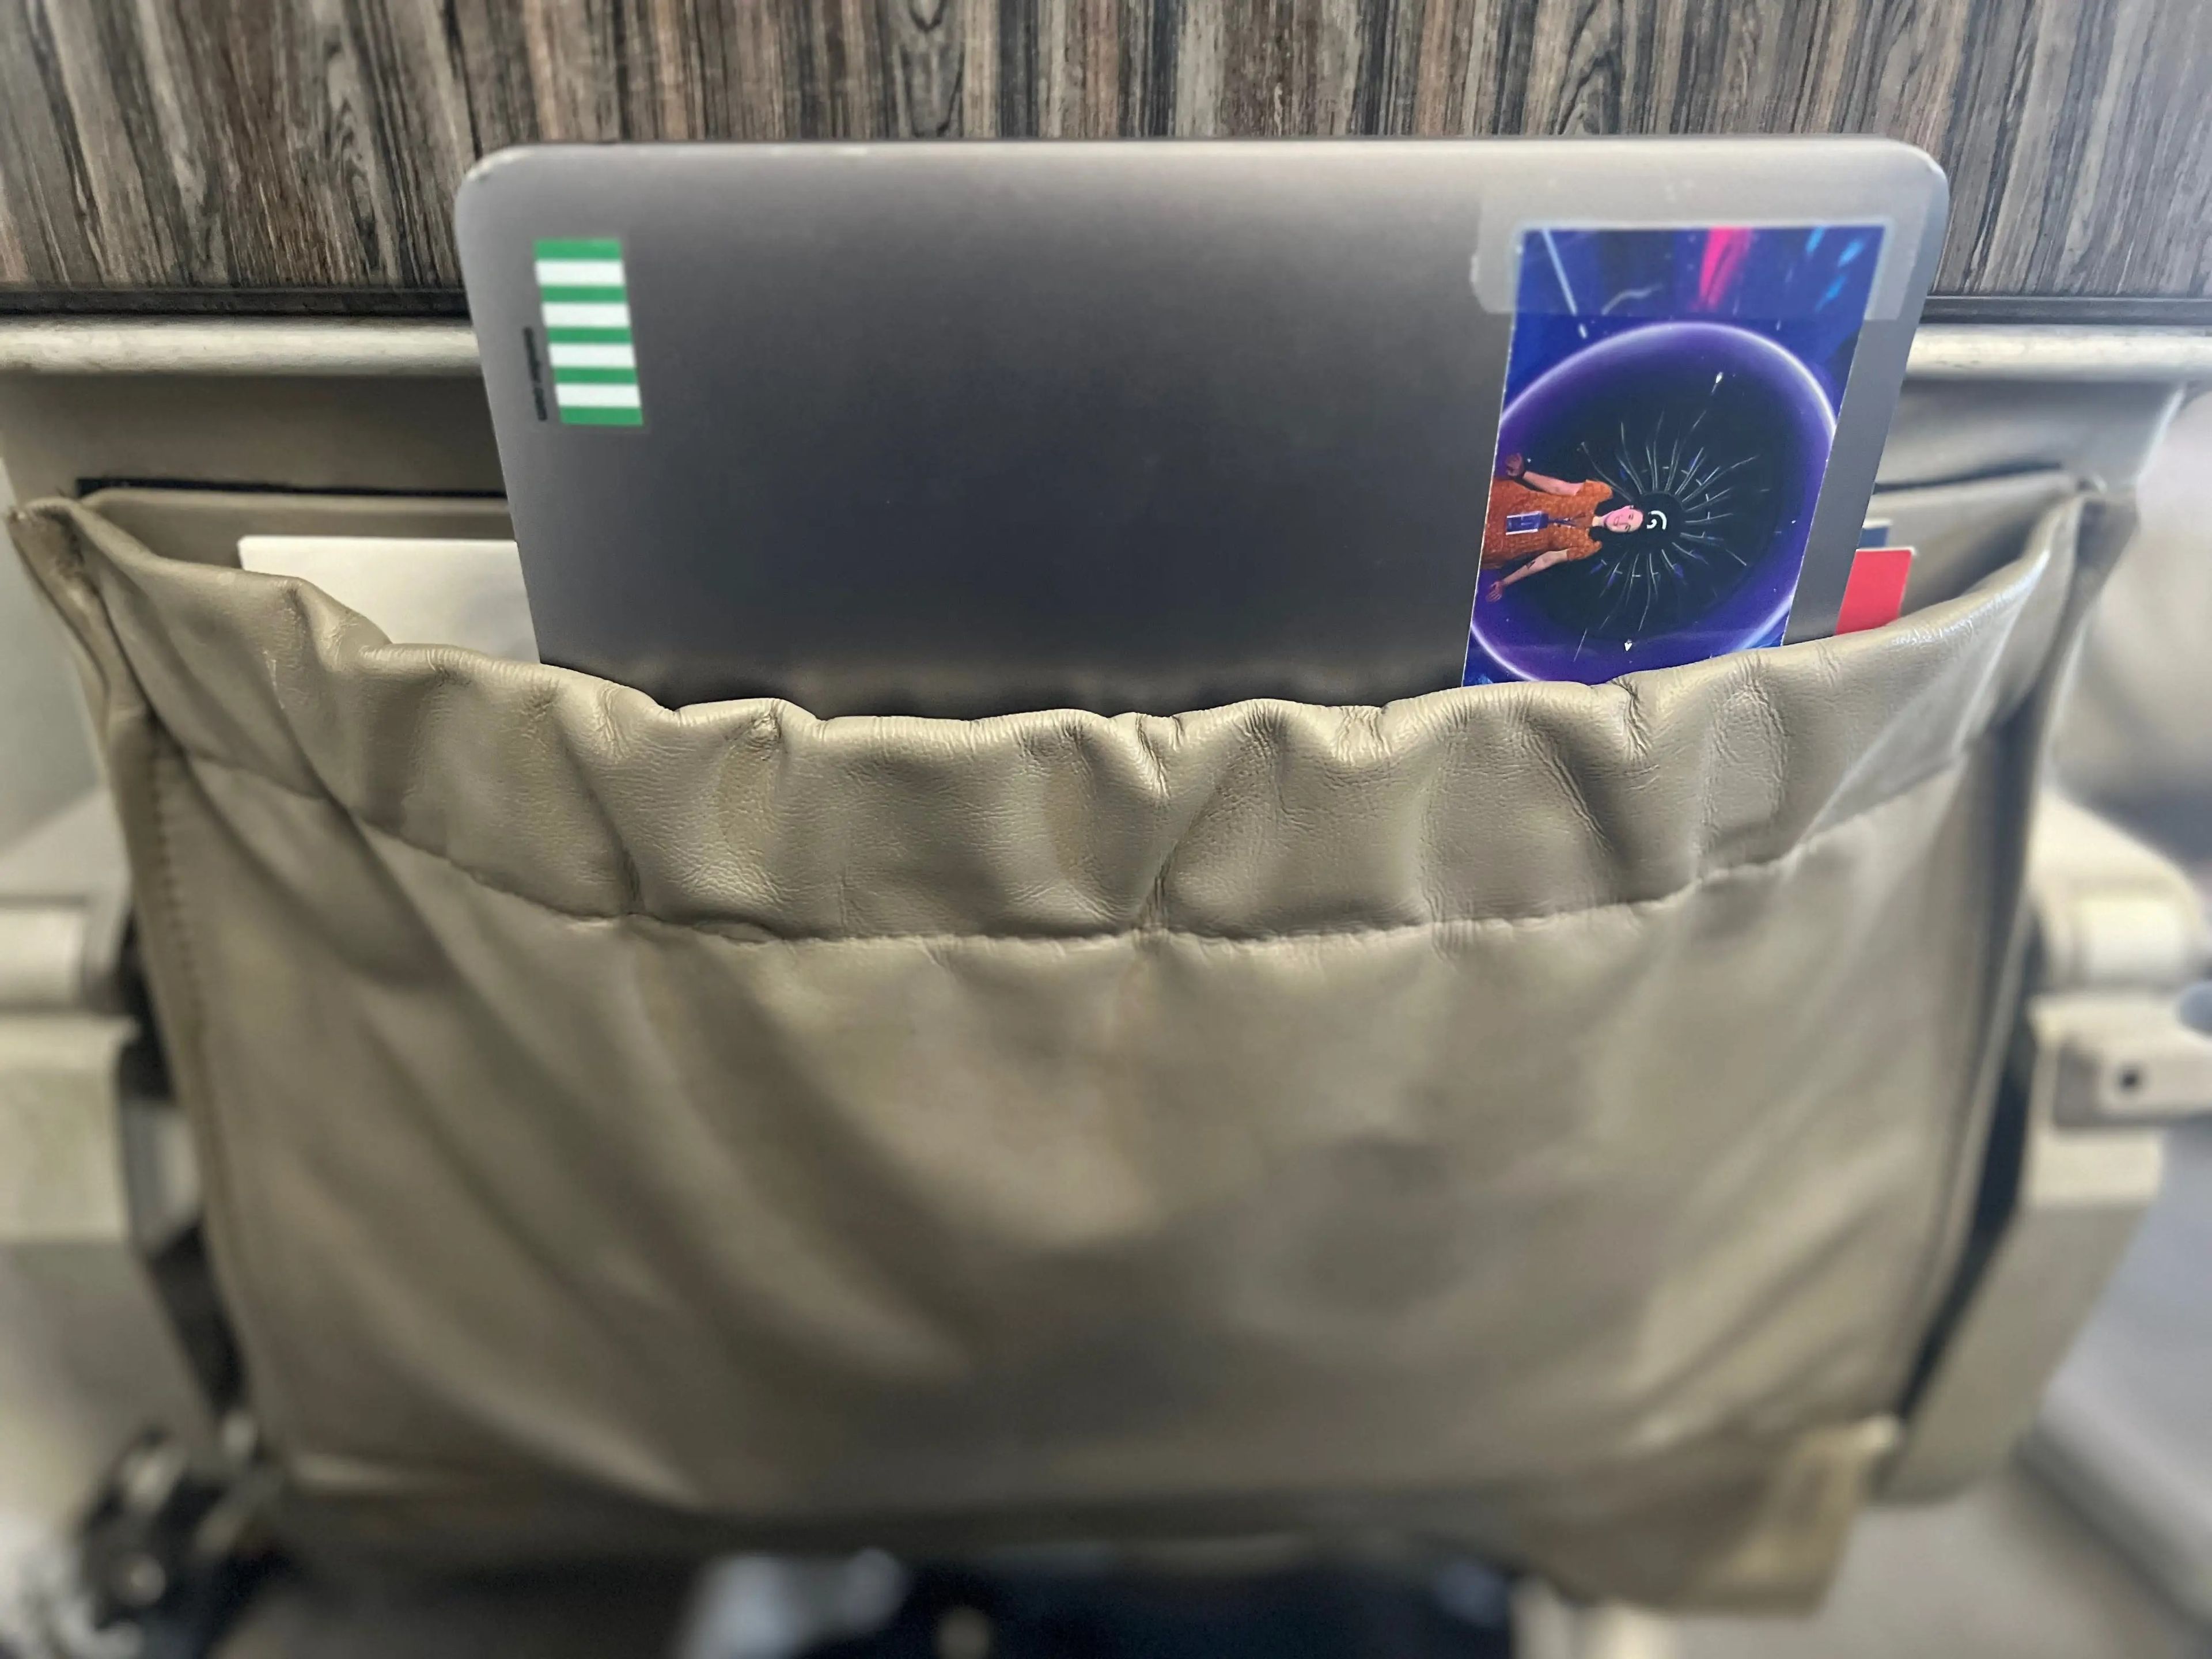 The author's laptop in the seatback pocket.